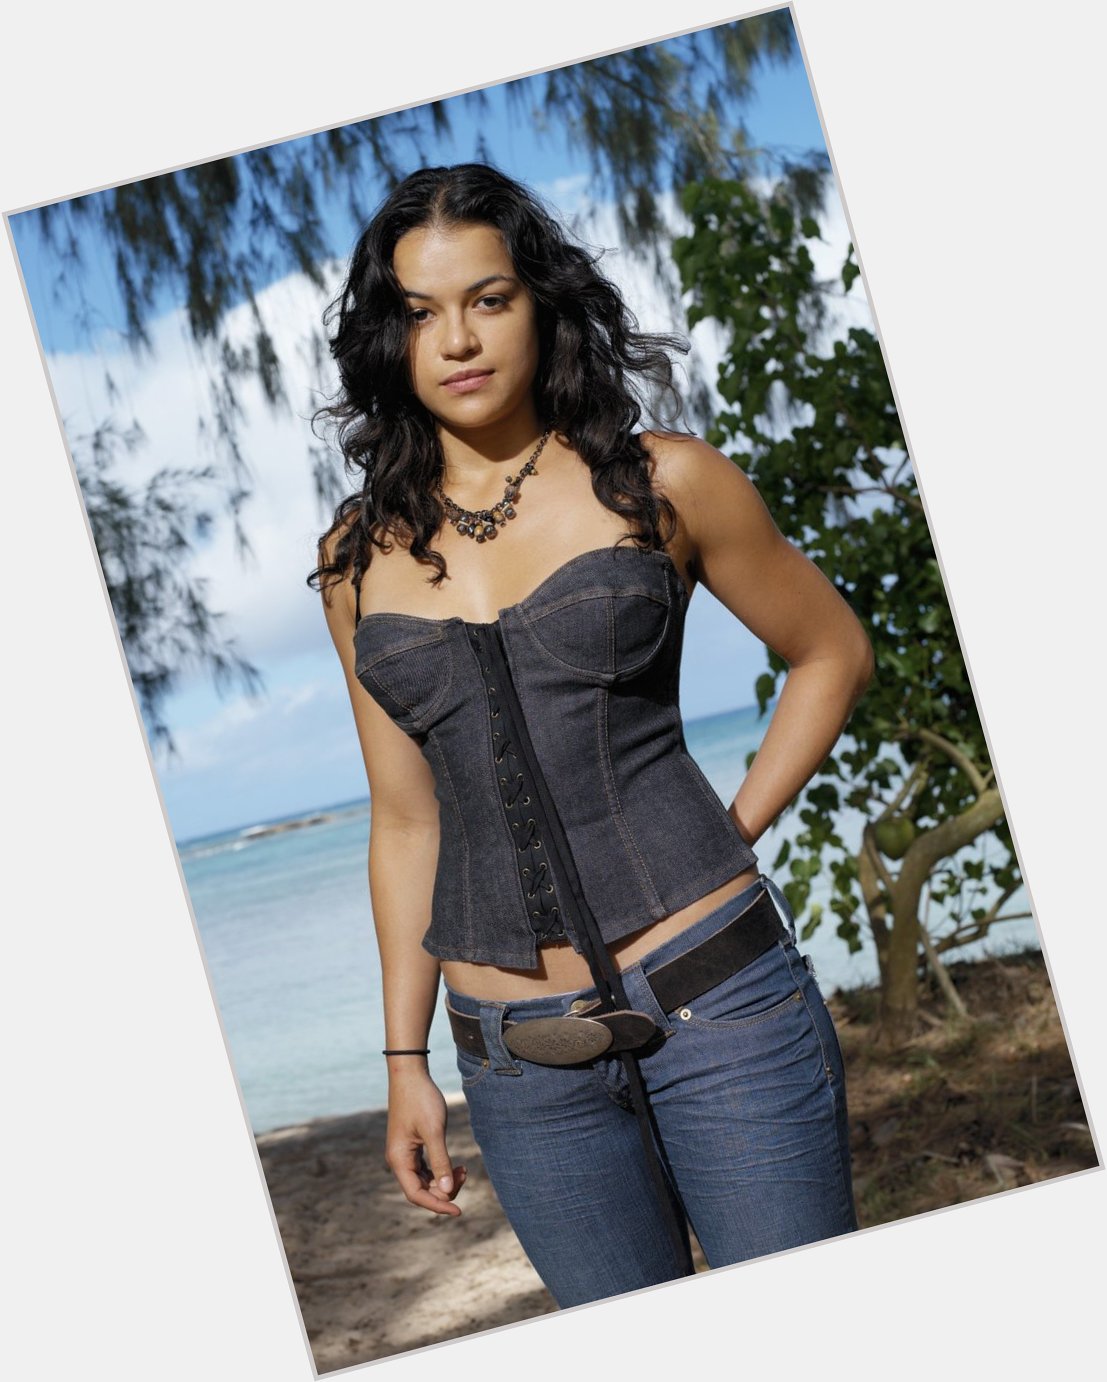 Wishing a happy birthday to Michelle Rodriguez who played Ana Lucia on 